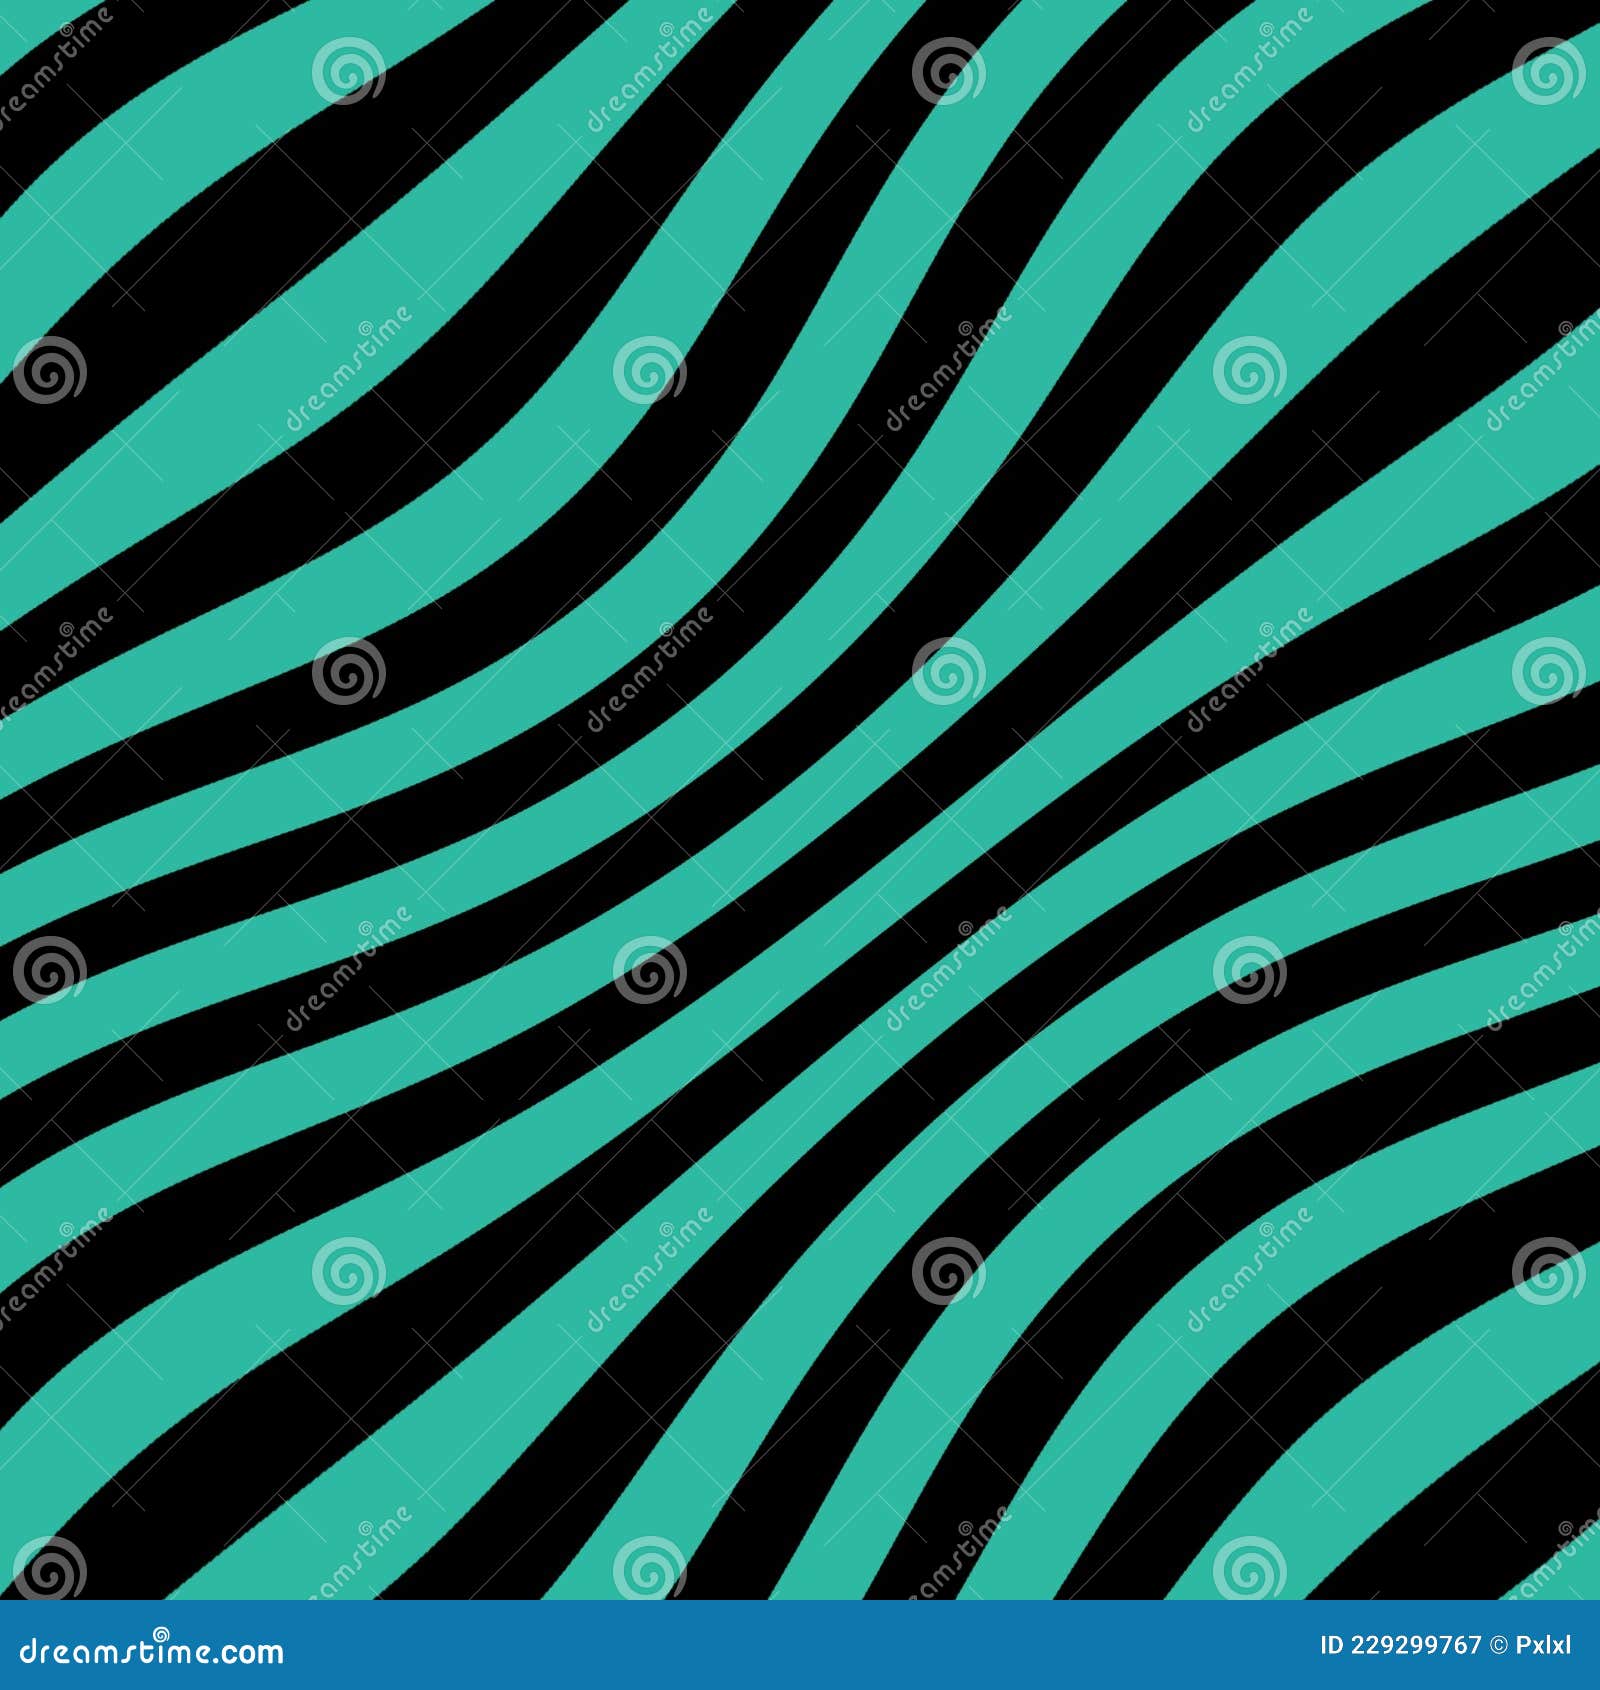 black and green wawes grafic background 